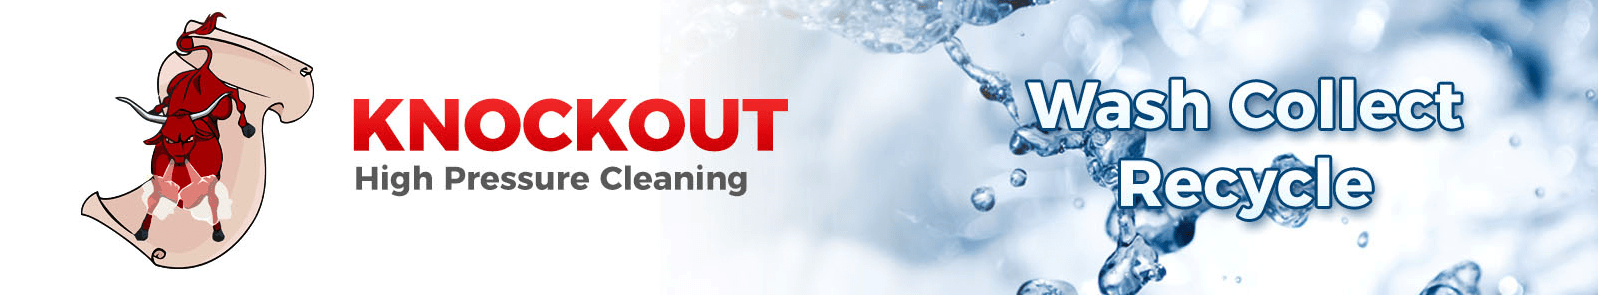 KNOCKOUT High Pressure Cleaning